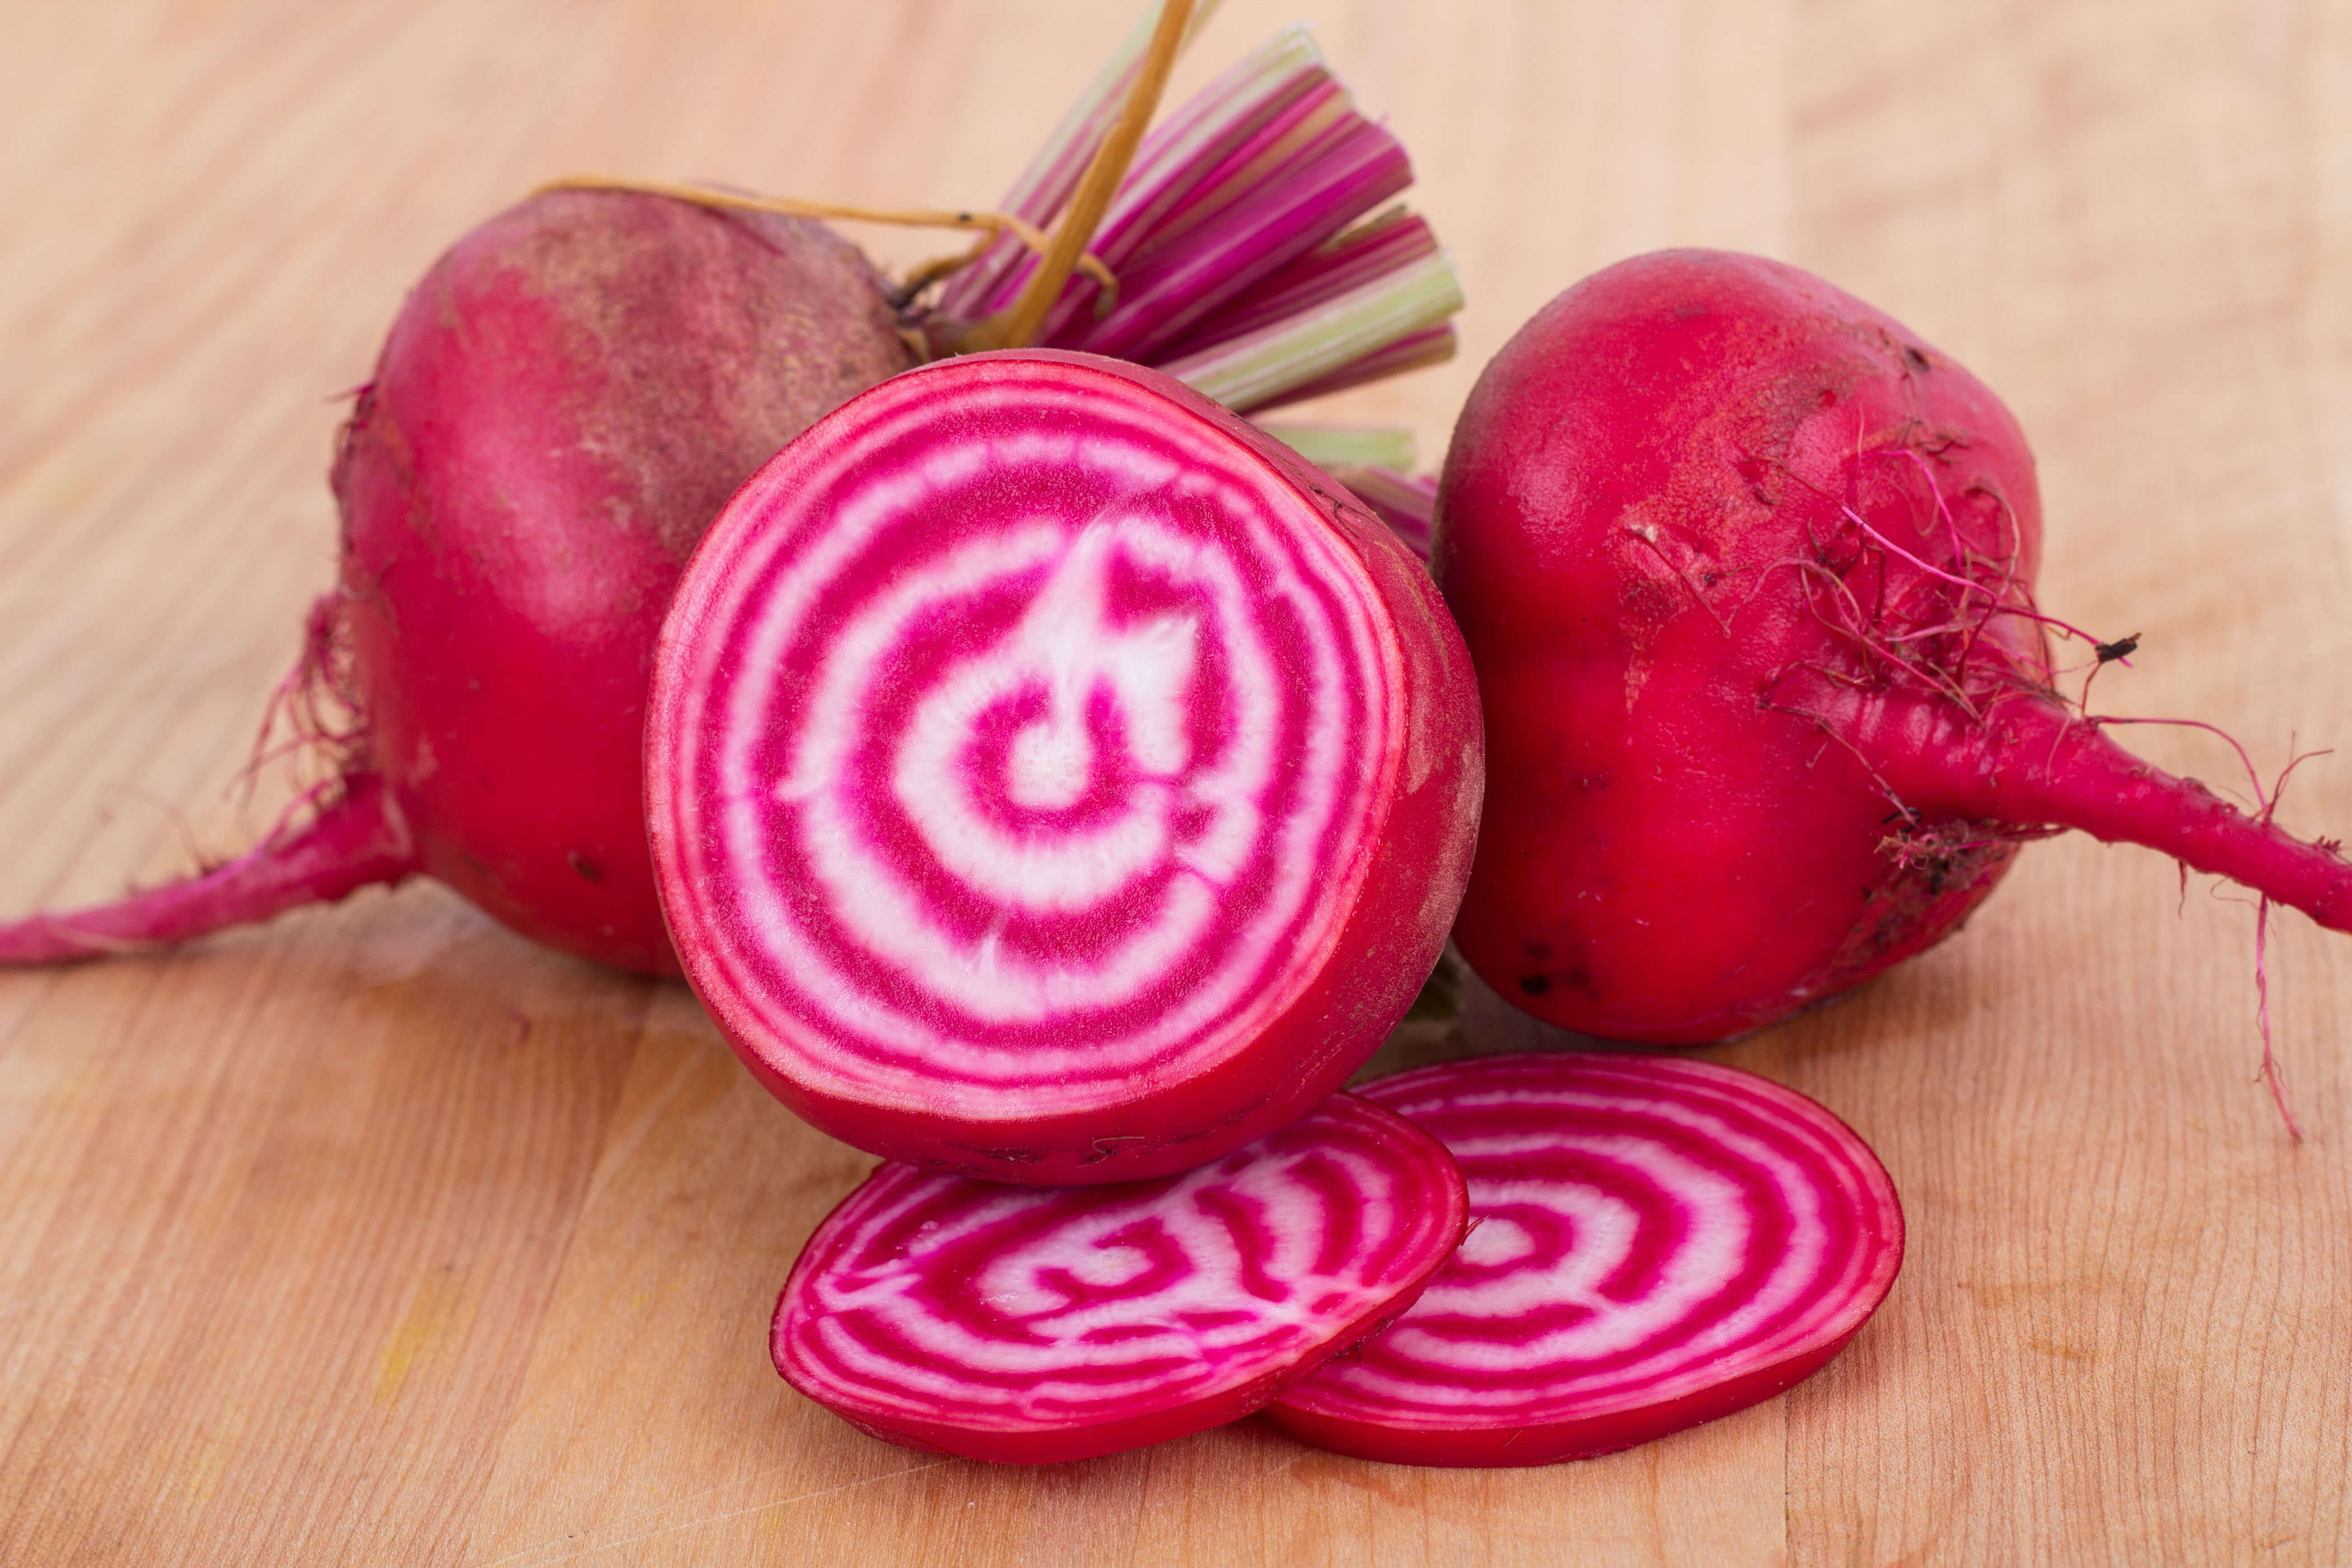 stripped beets